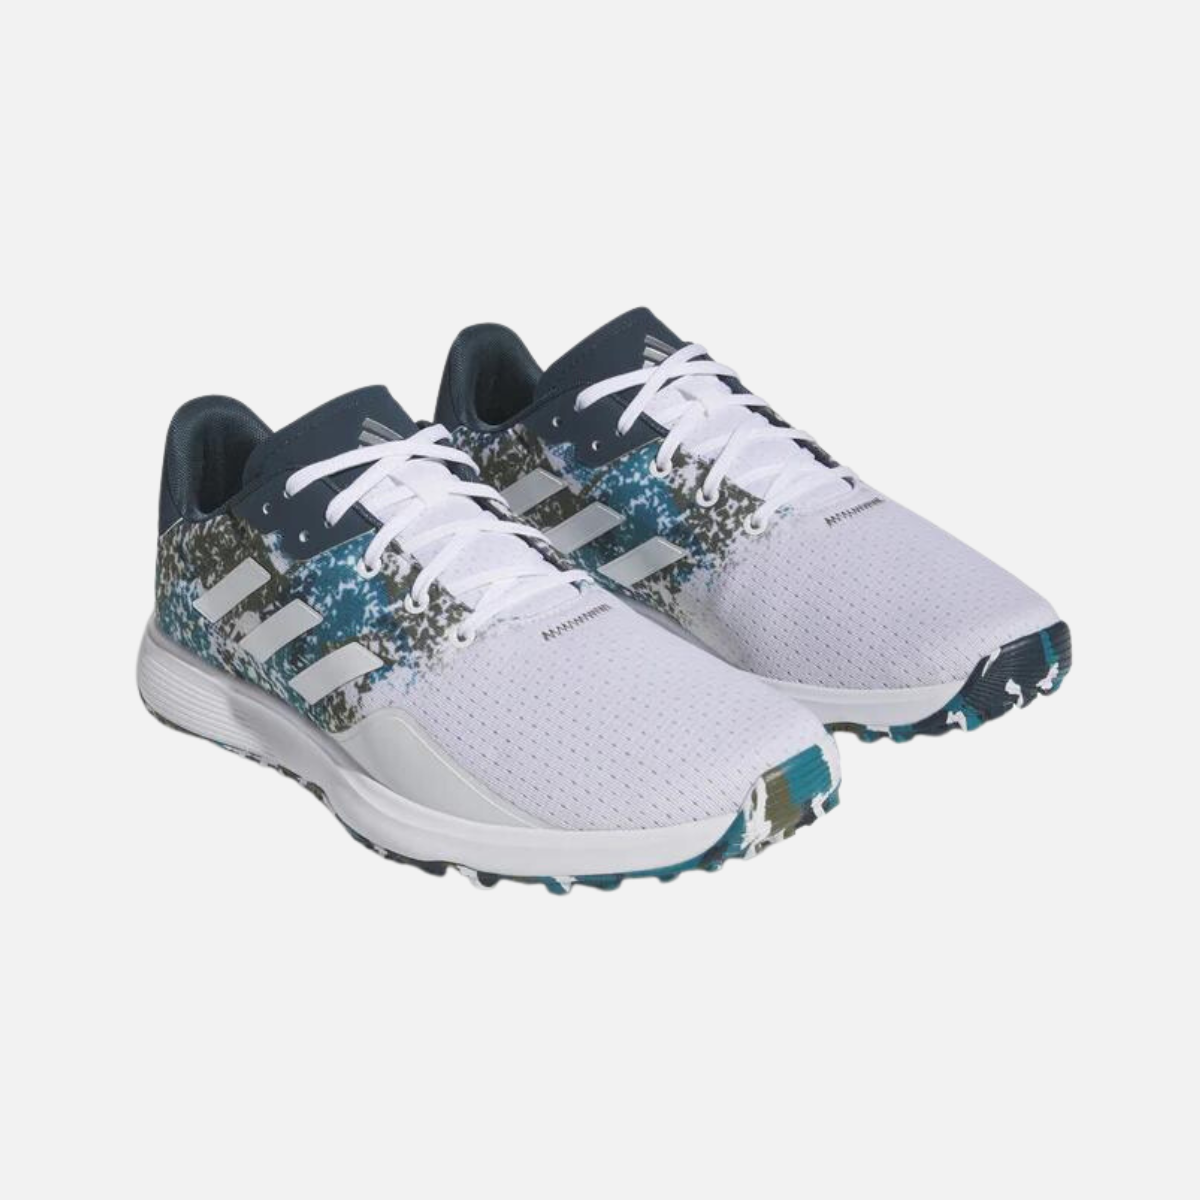 Adidas S2G SL 23 Golf Shoes -White/Silver/Arctic Night